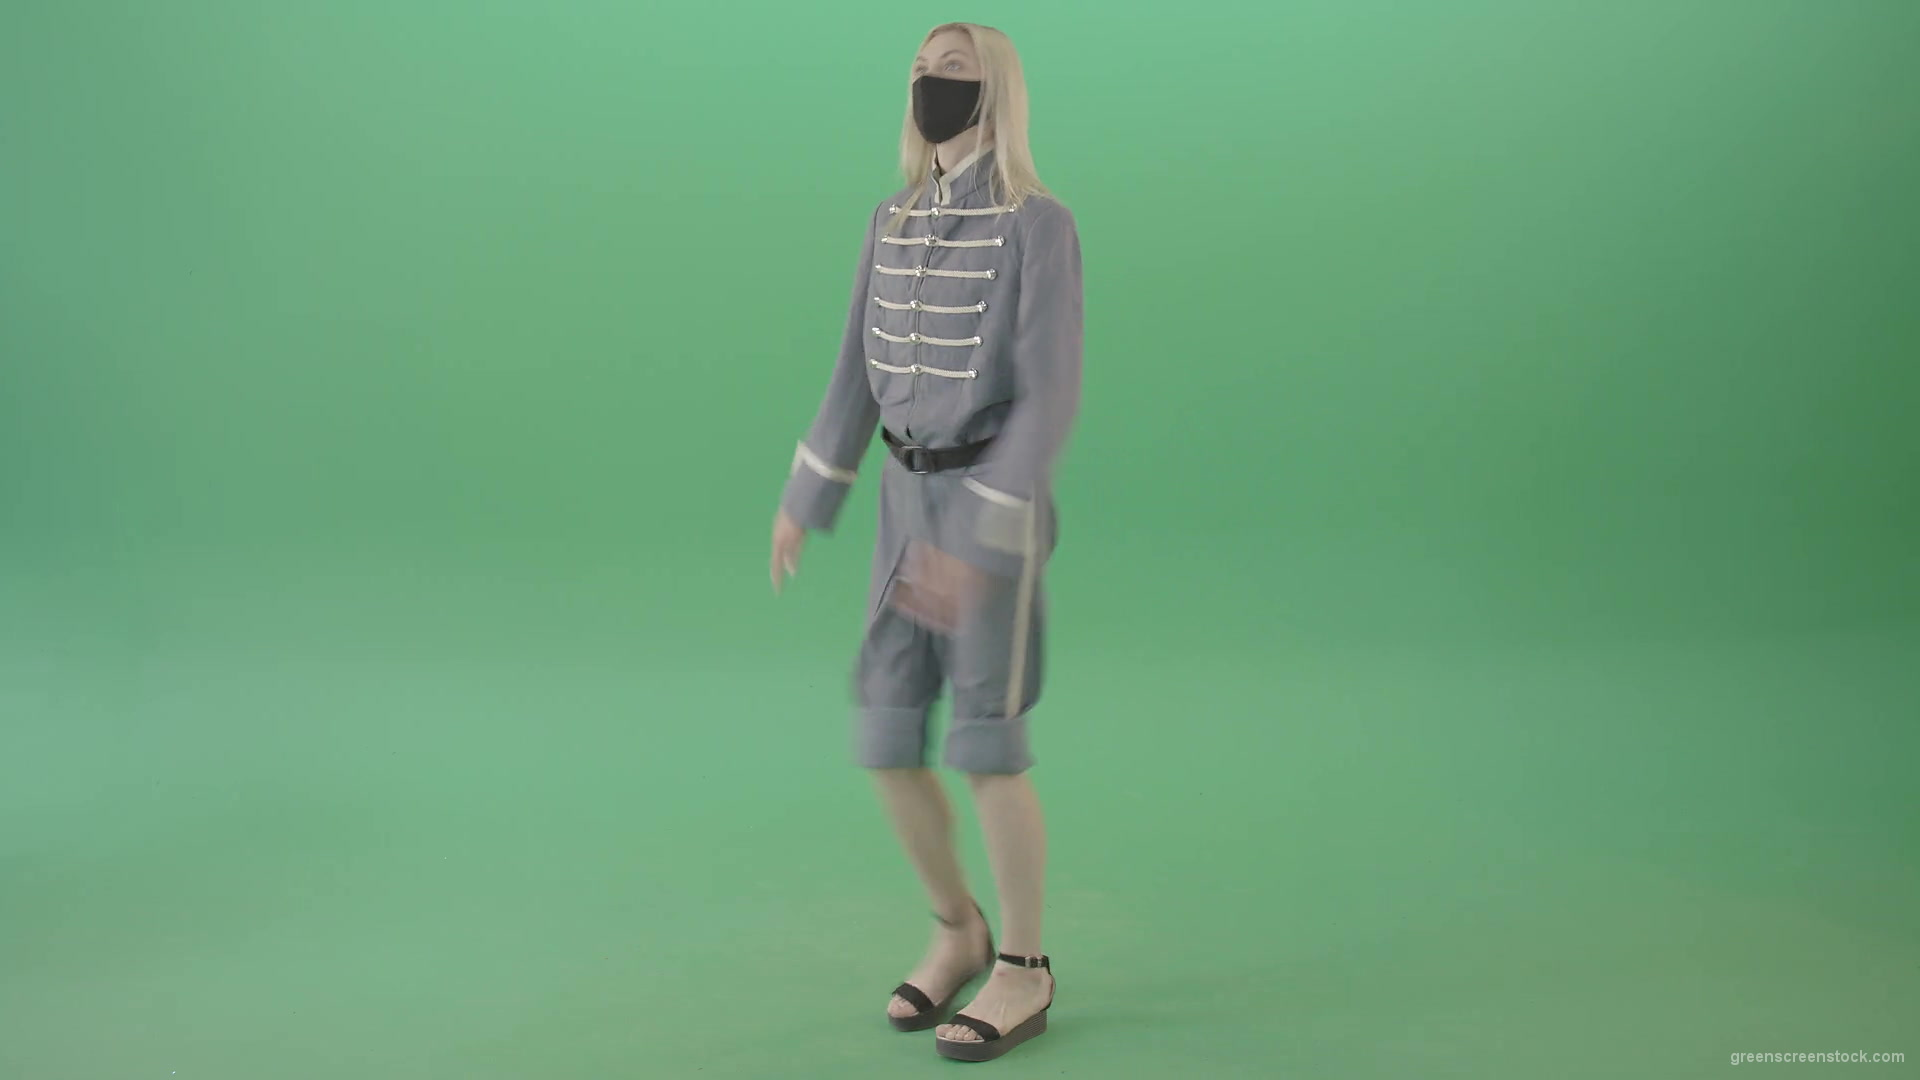 Young-Blonde-woman-marching-in-side-view-with-Covid19-mask-on-green-screen-4K-Video-Footage-1920_008 Green Screen Stock